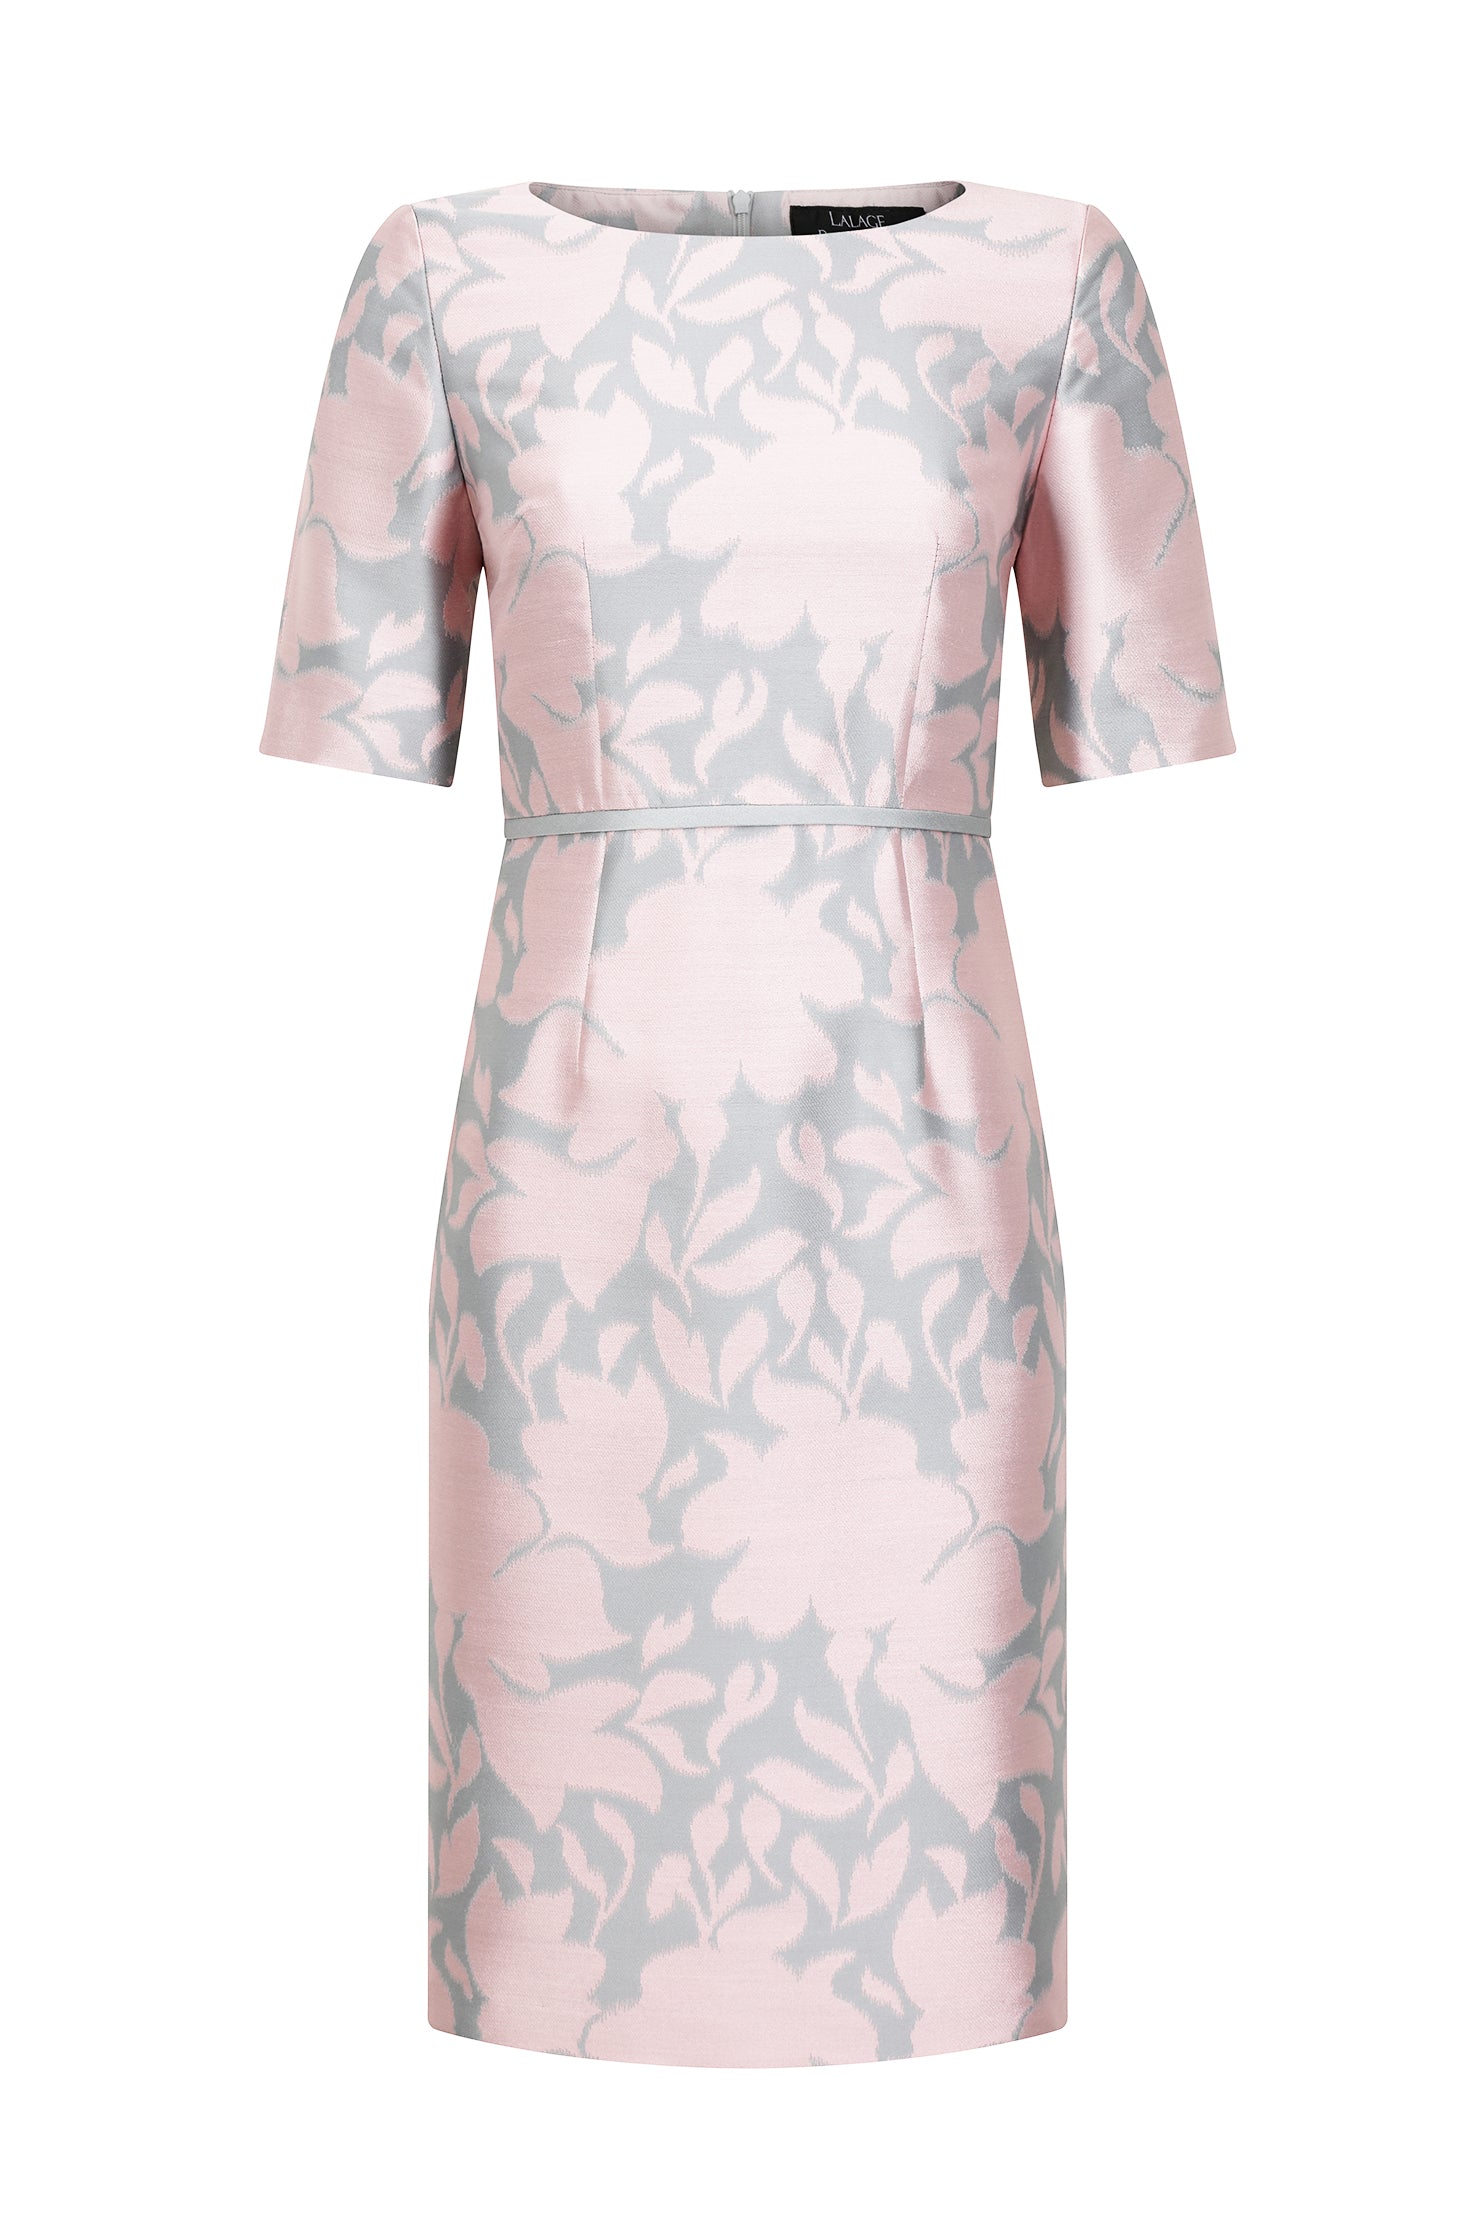 Silk Floral Jacquard Dress with Sleeves | Angie | Lalage Beaumont